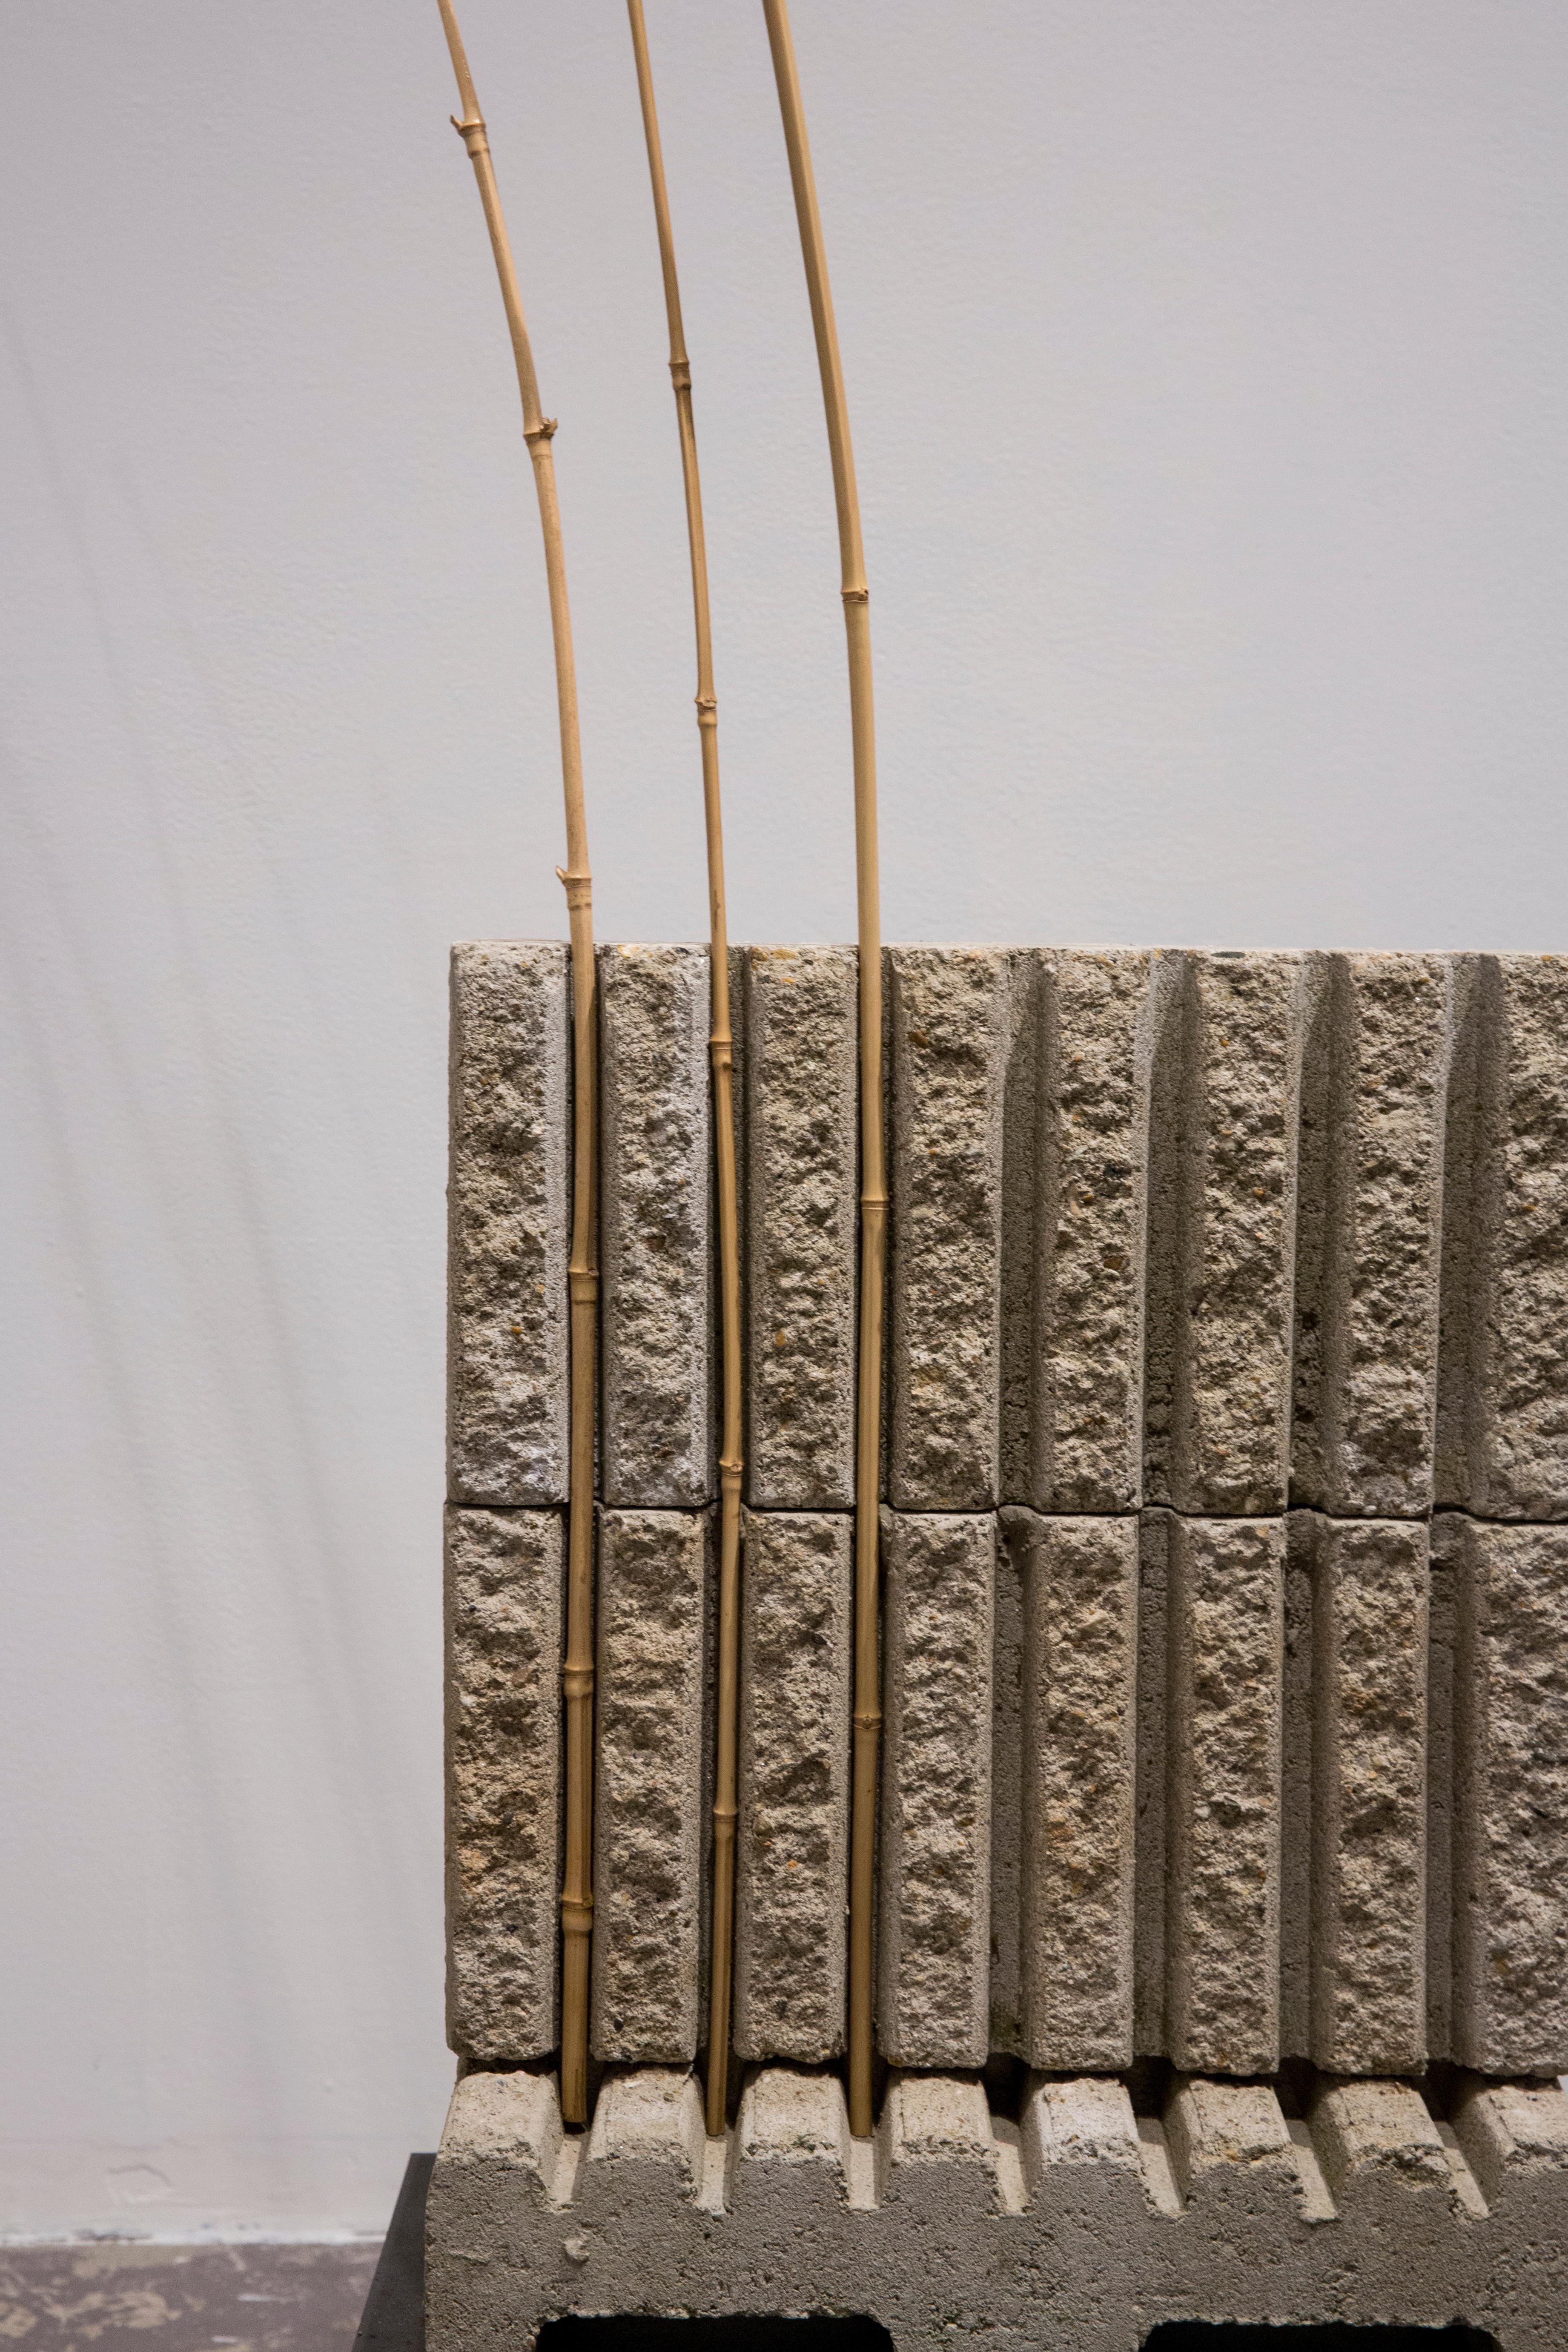 ON THE HUSTINGS (RISE) - Concrete Industrial Sculpture with Bamboo For Sale 3